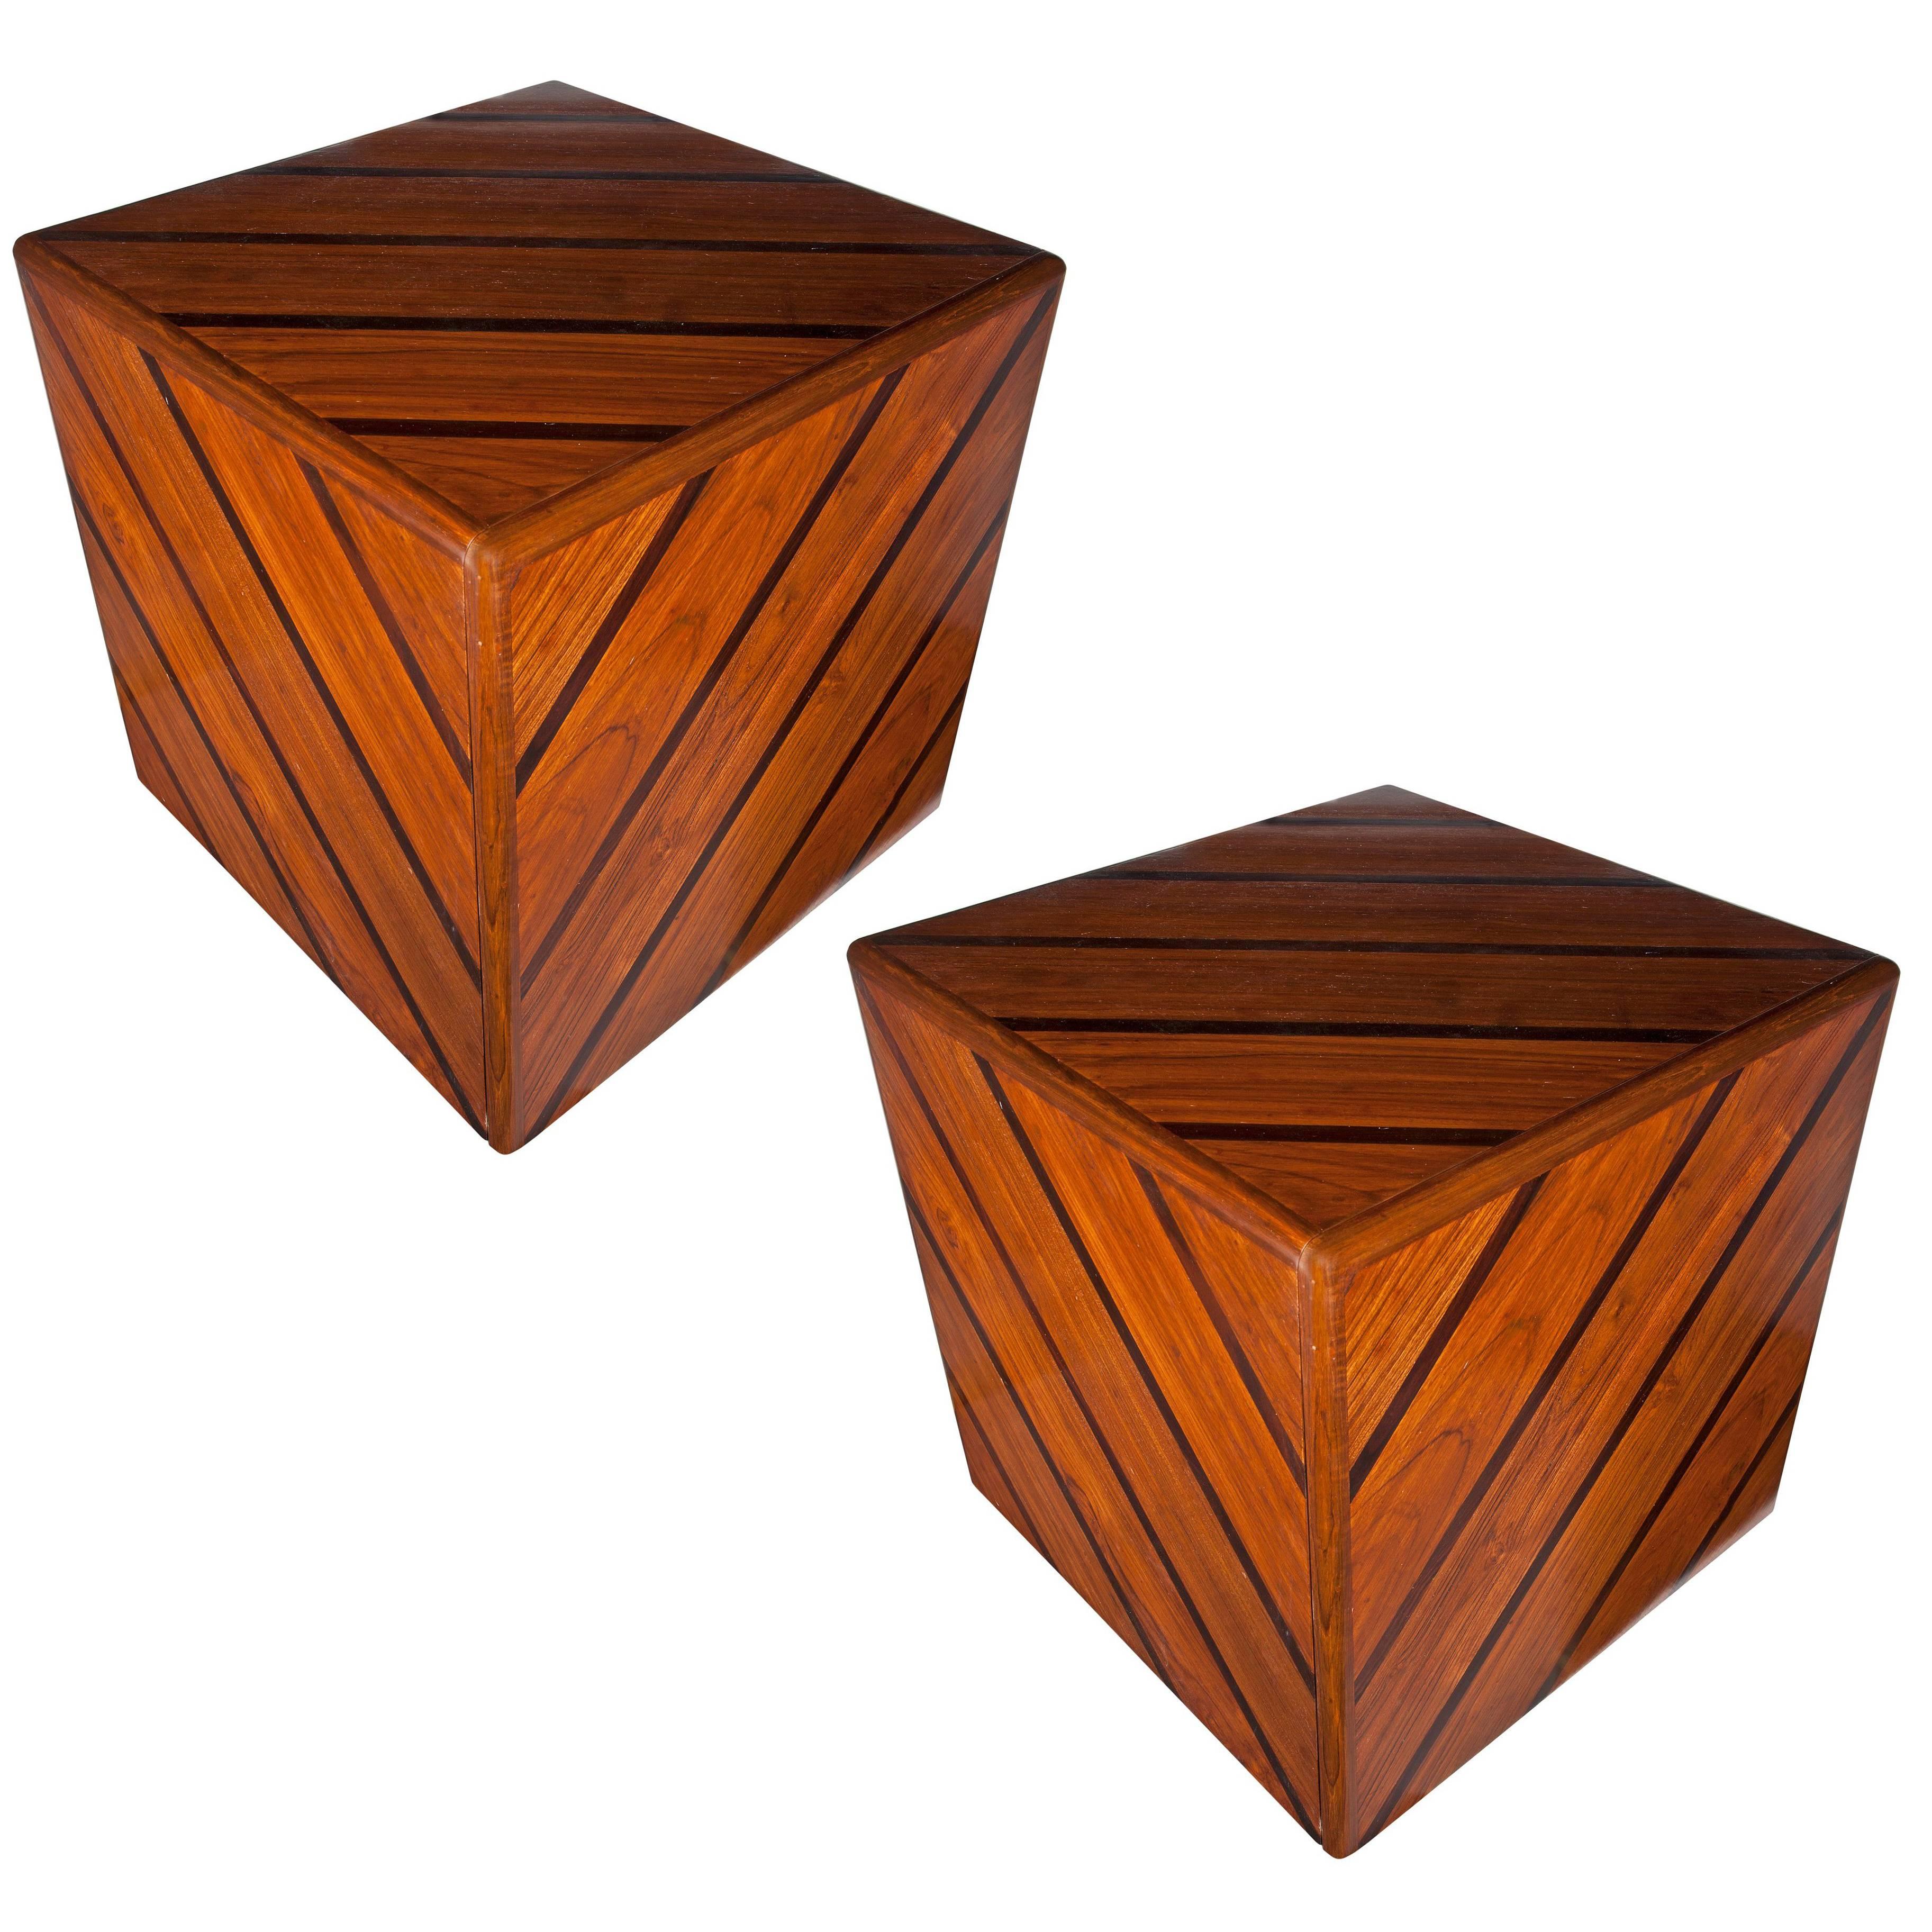 Pair of Mahogany and Rosewood Cube Tables or Stools with Front Door